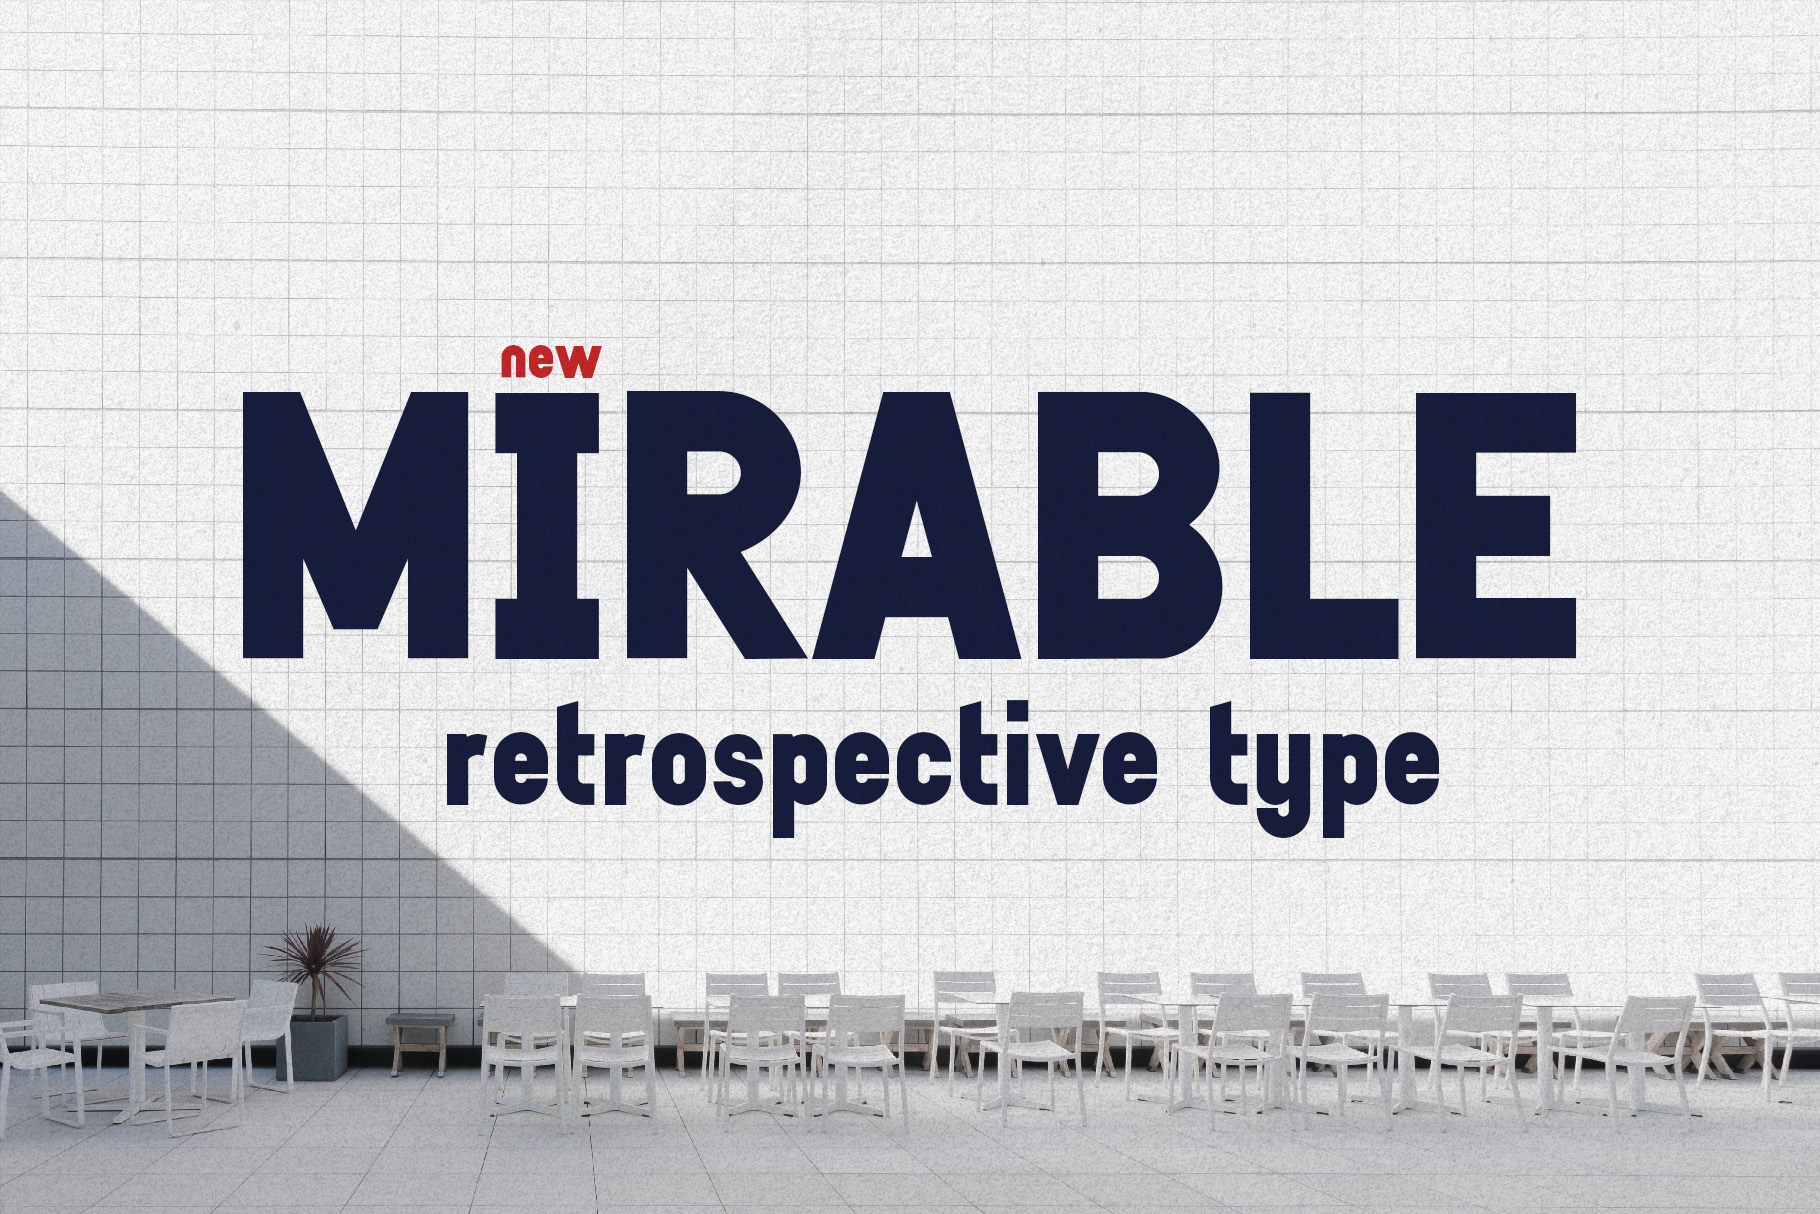 Mirable - Retrospective 1980s Type by HipFonts on Dribbble